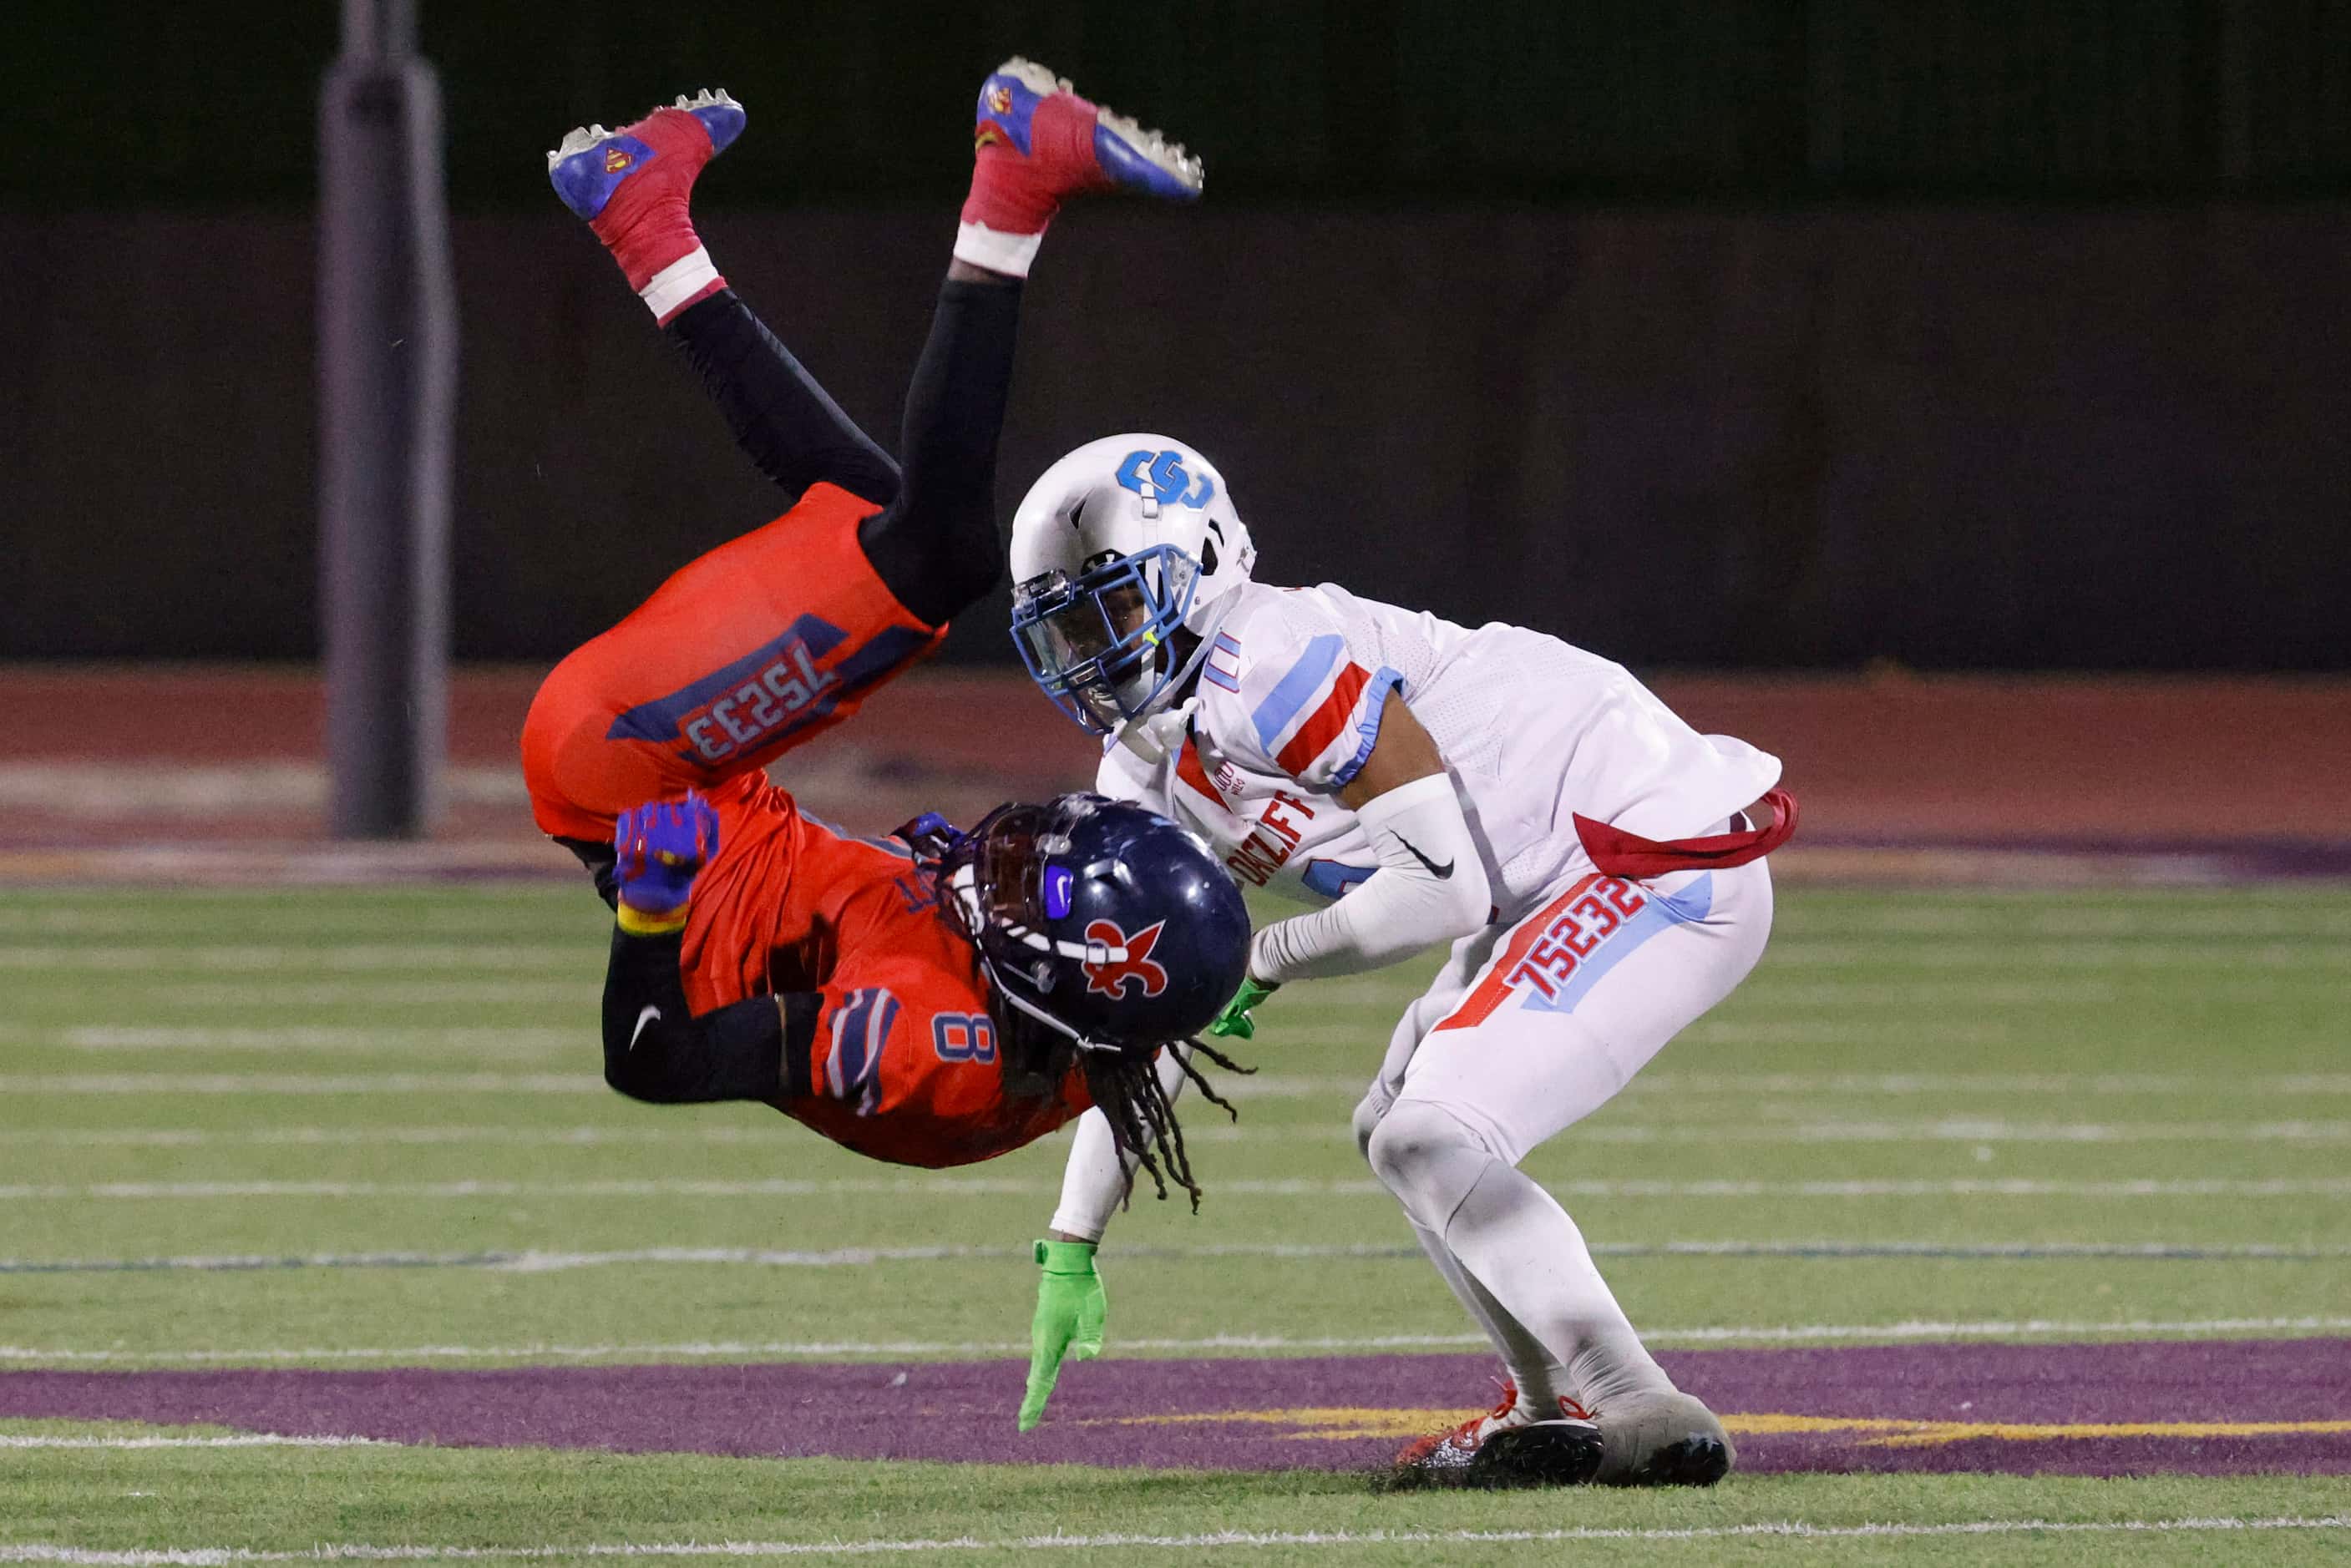 Kimball high’s Xavier Hampton (left) flips after getting charged by Carter high’s Charles...